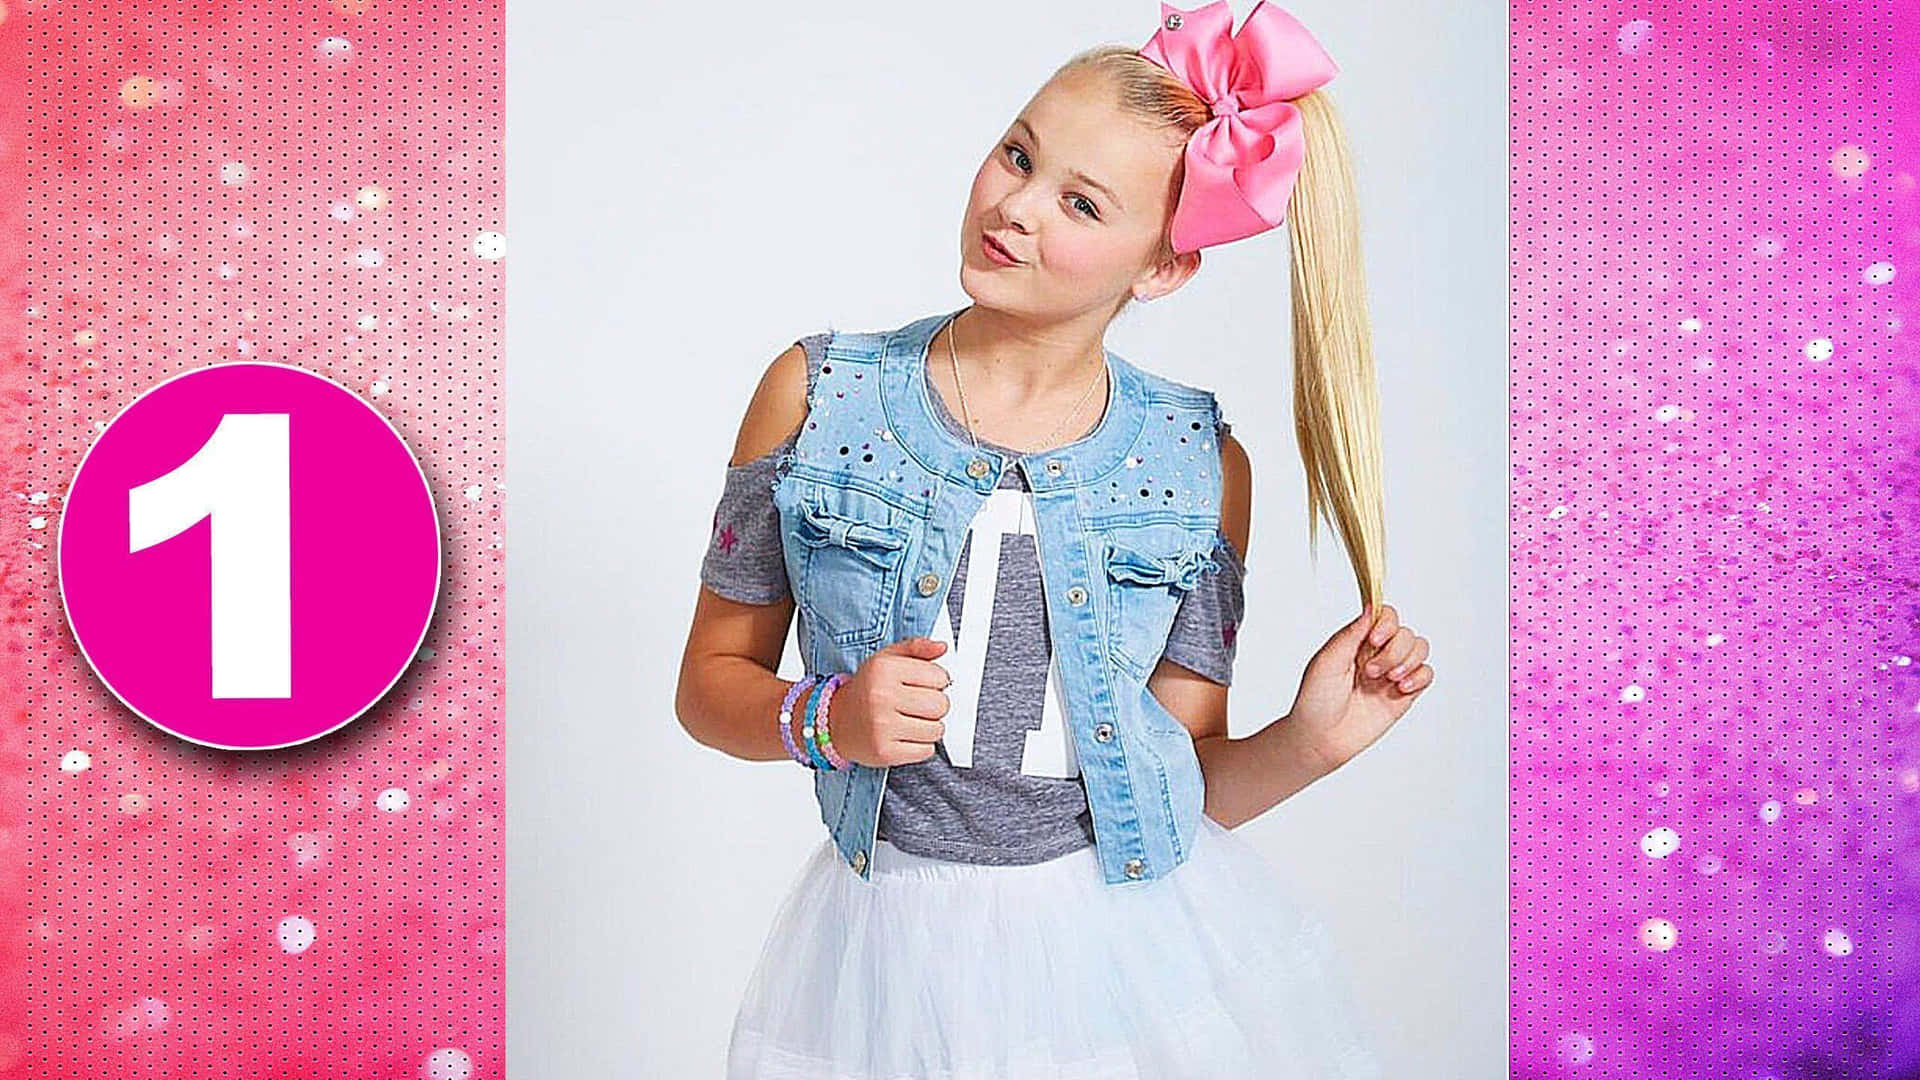 Jojo Siwa rocks the stage with her signature bows and energetic moves!